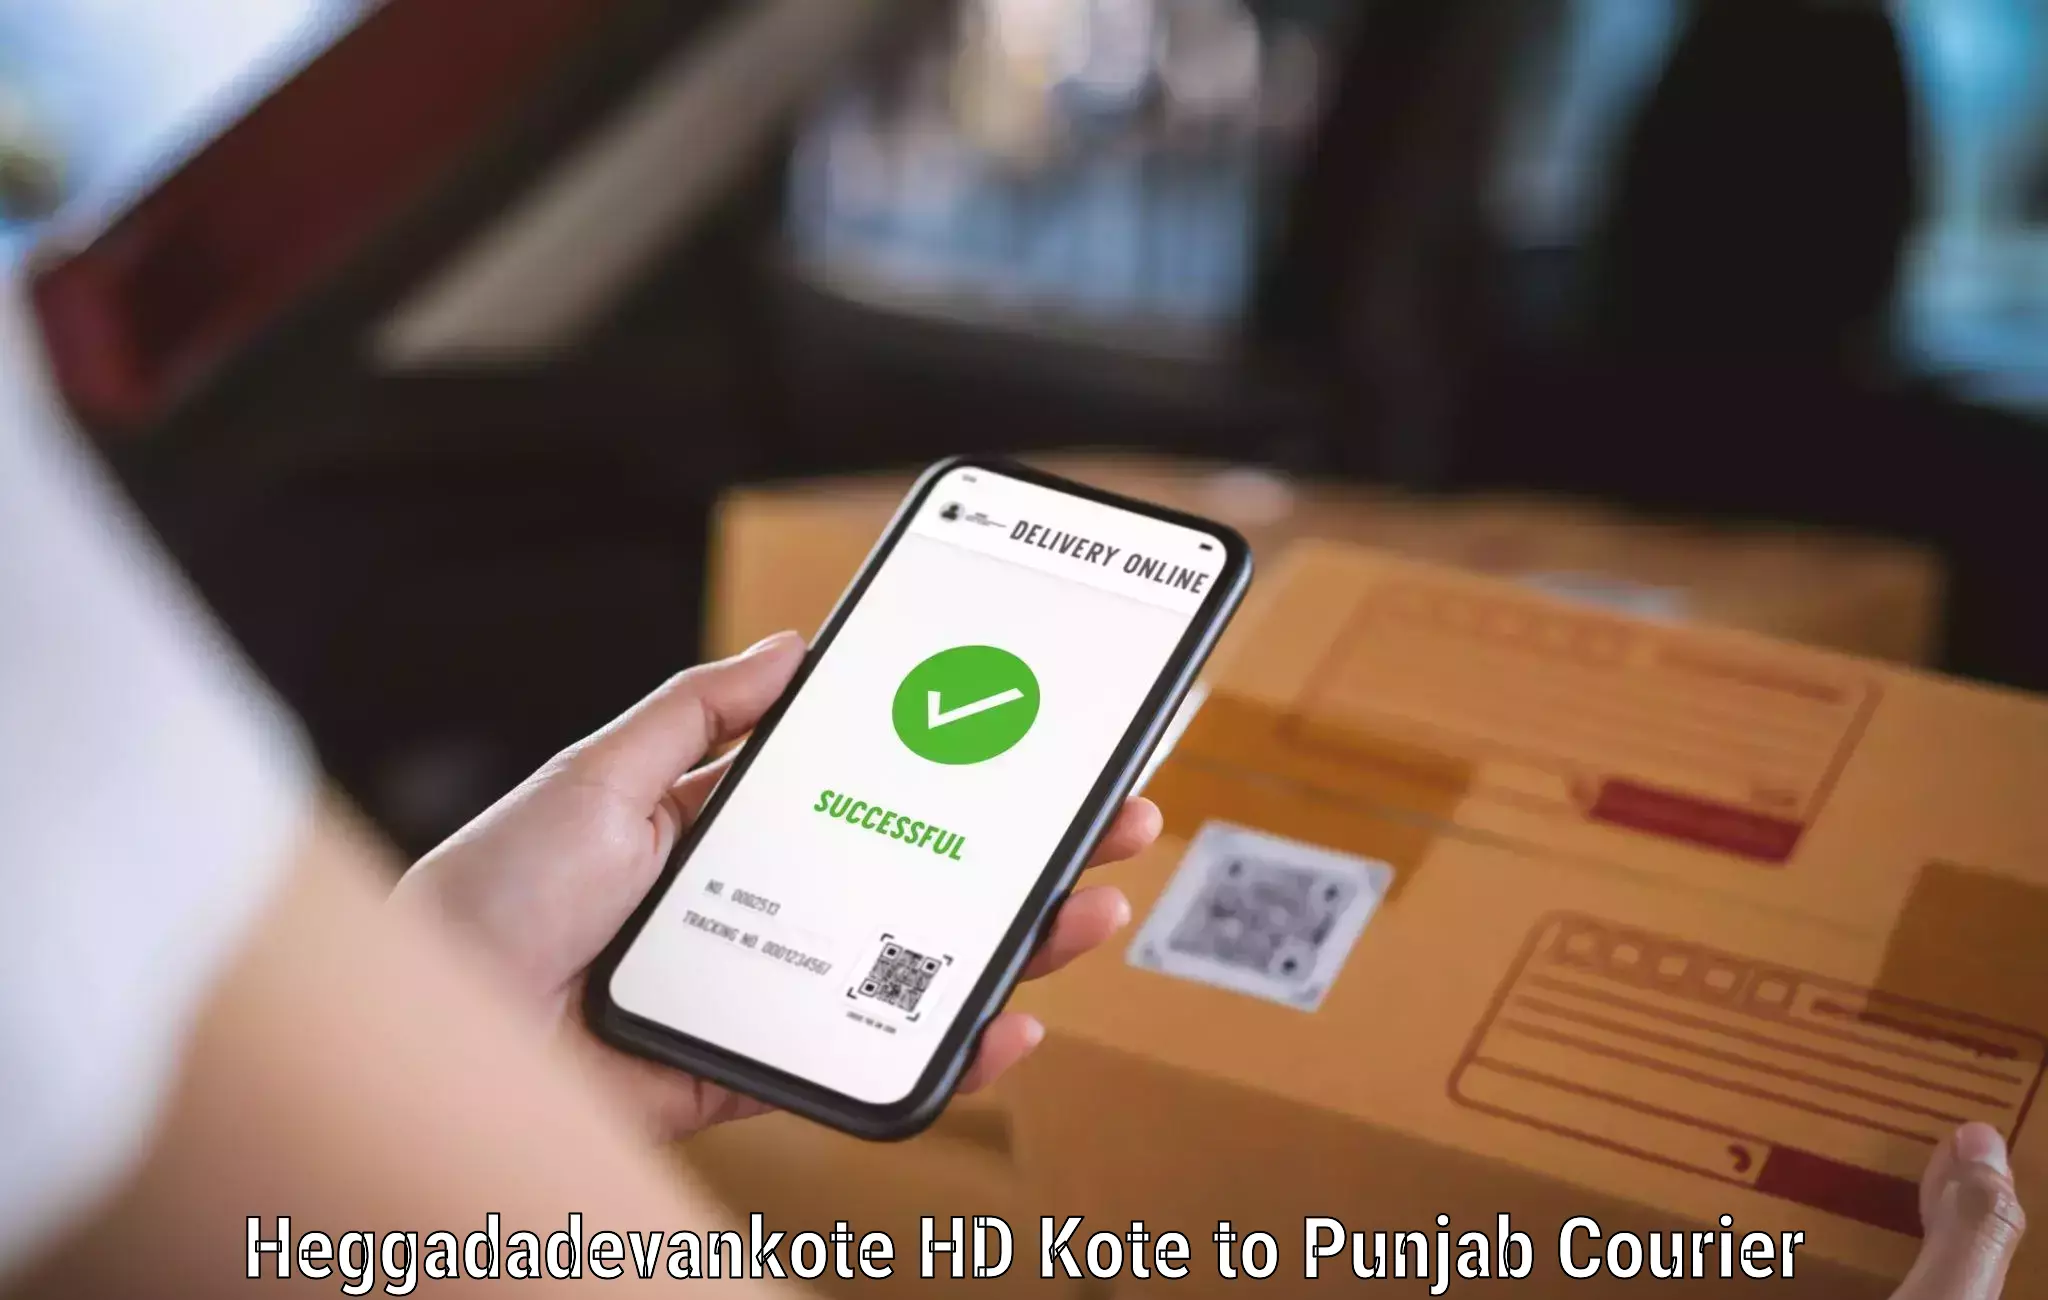 Full-service courier options in Heggadadevankote HD Kote to Punjab